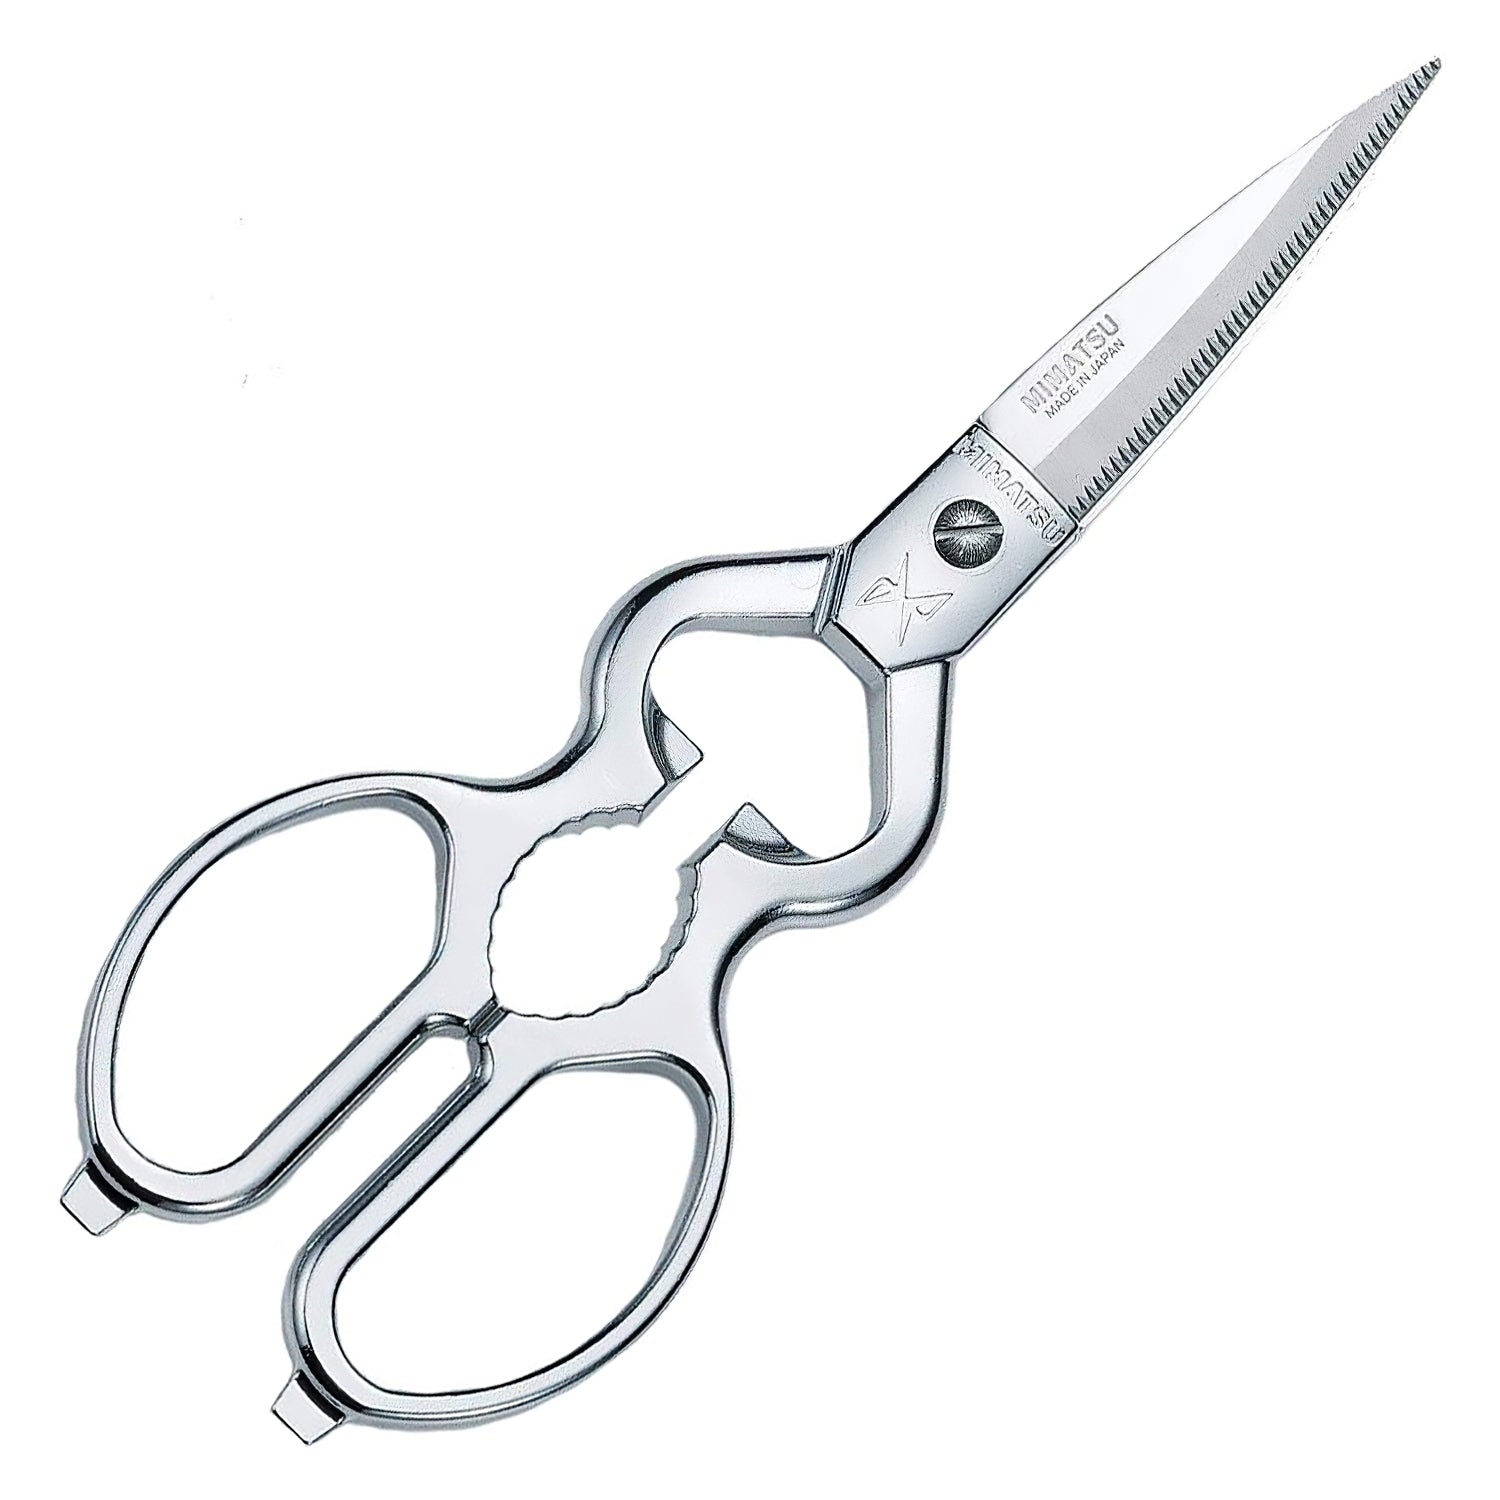 MIMATSU Kitchen Scissors Removable Hand Made 152g - Made in Japan